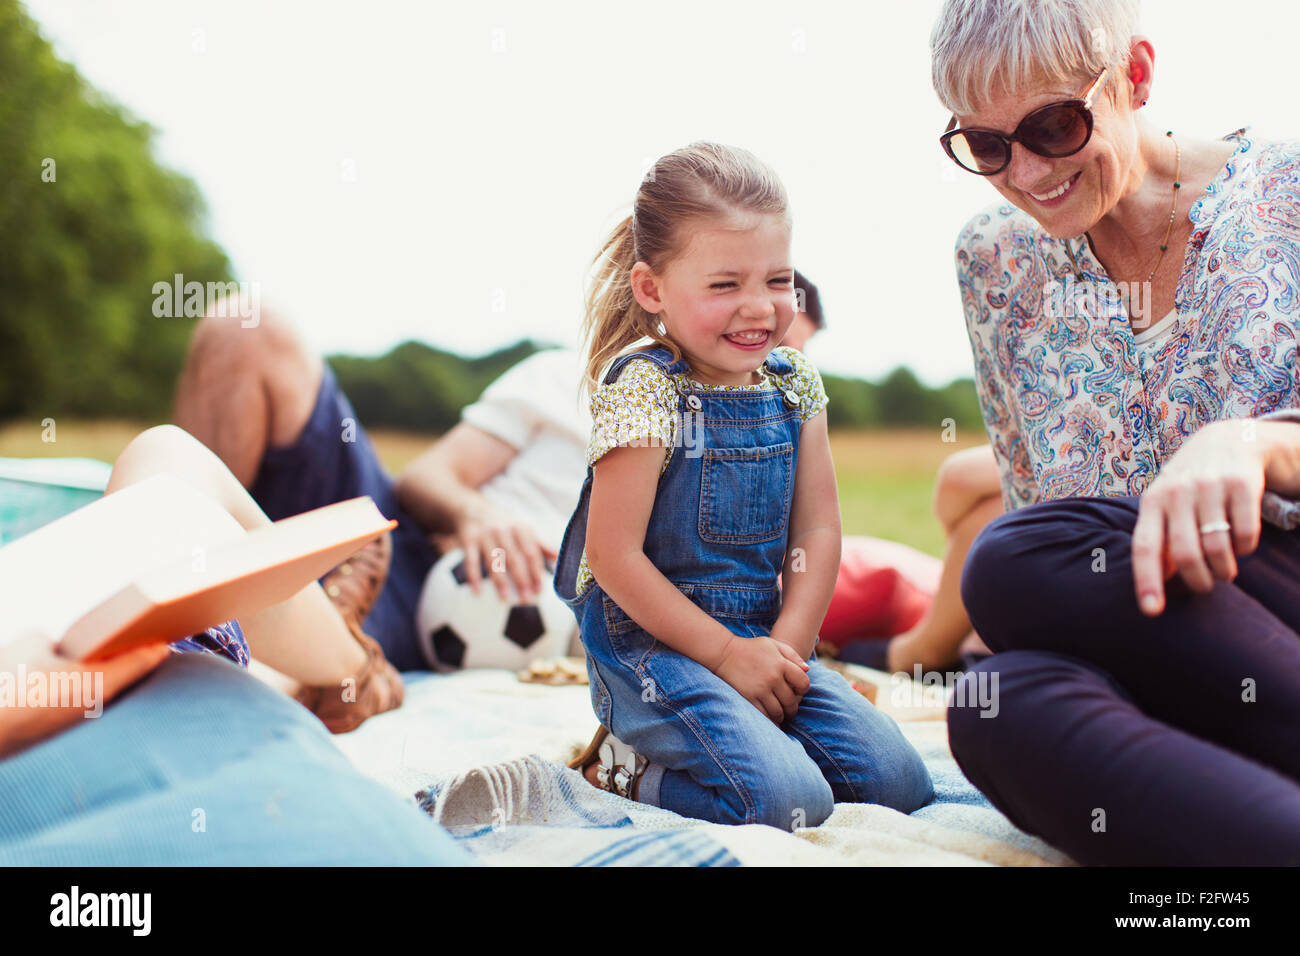 Grandmother and granddaughter laughing on blanket Stock Photo